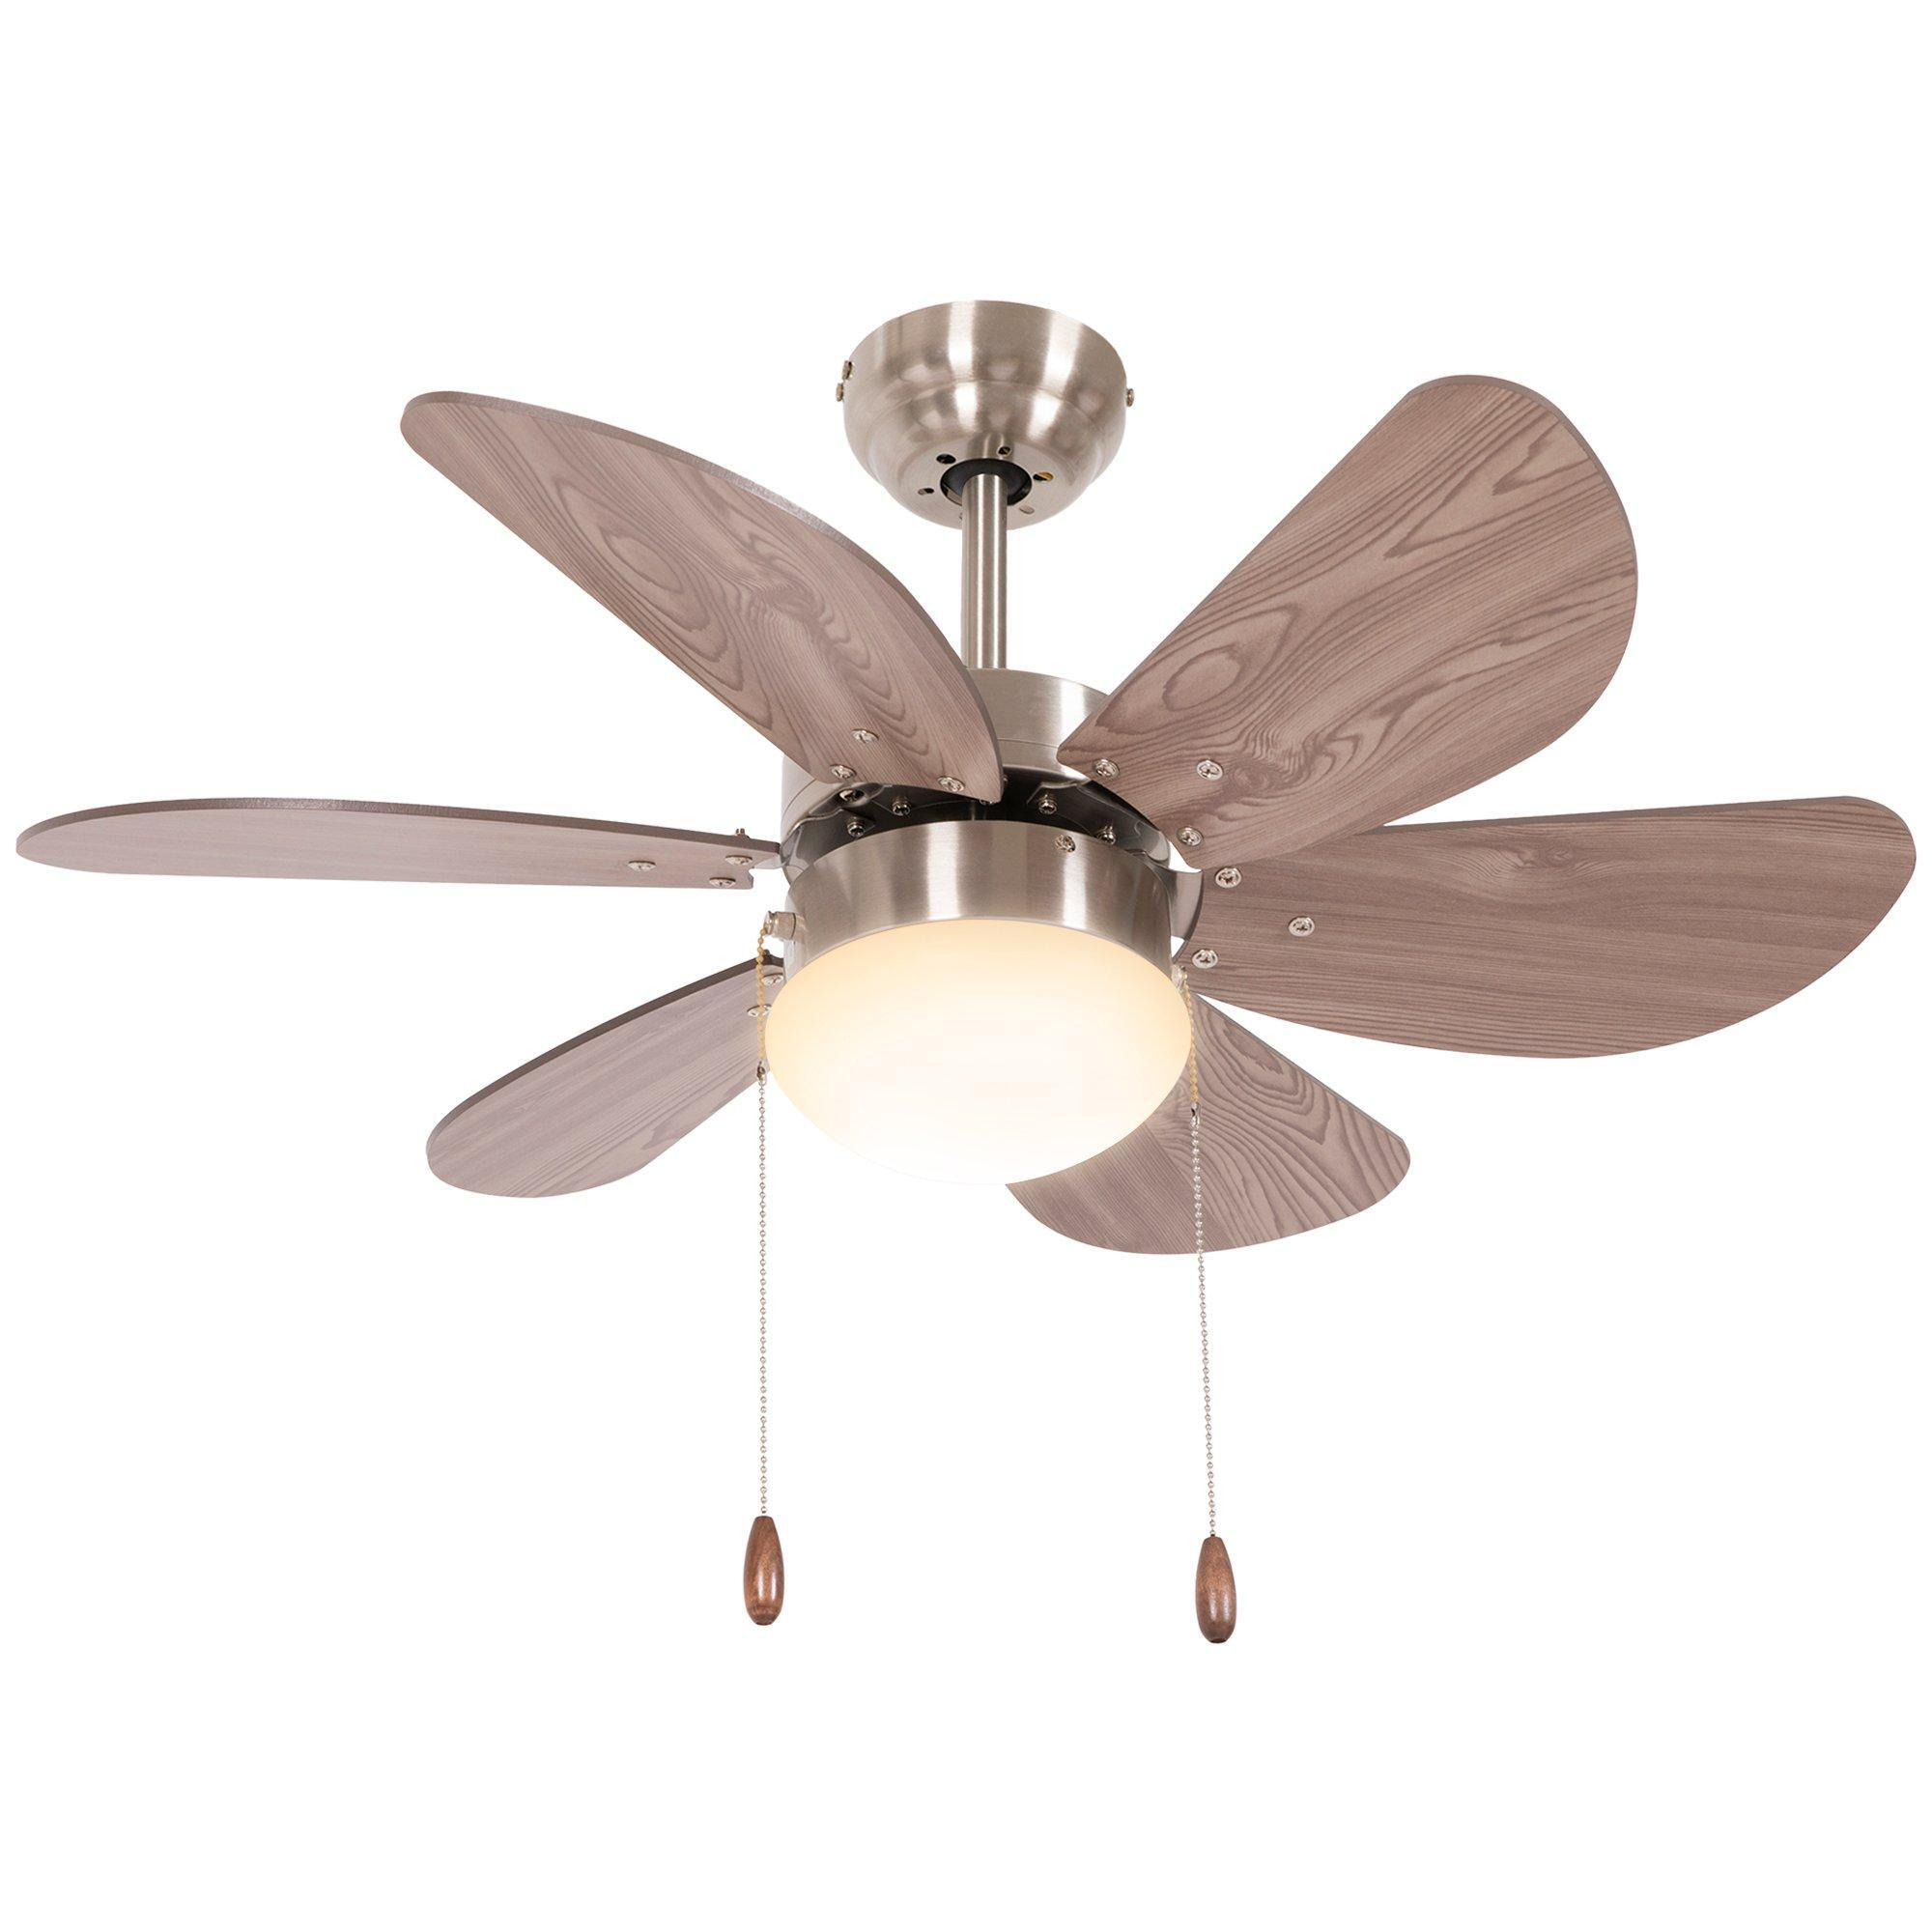 Ceiling Fan wit Light Reversible Airflow 6 Blades Wall Mounting - image 1